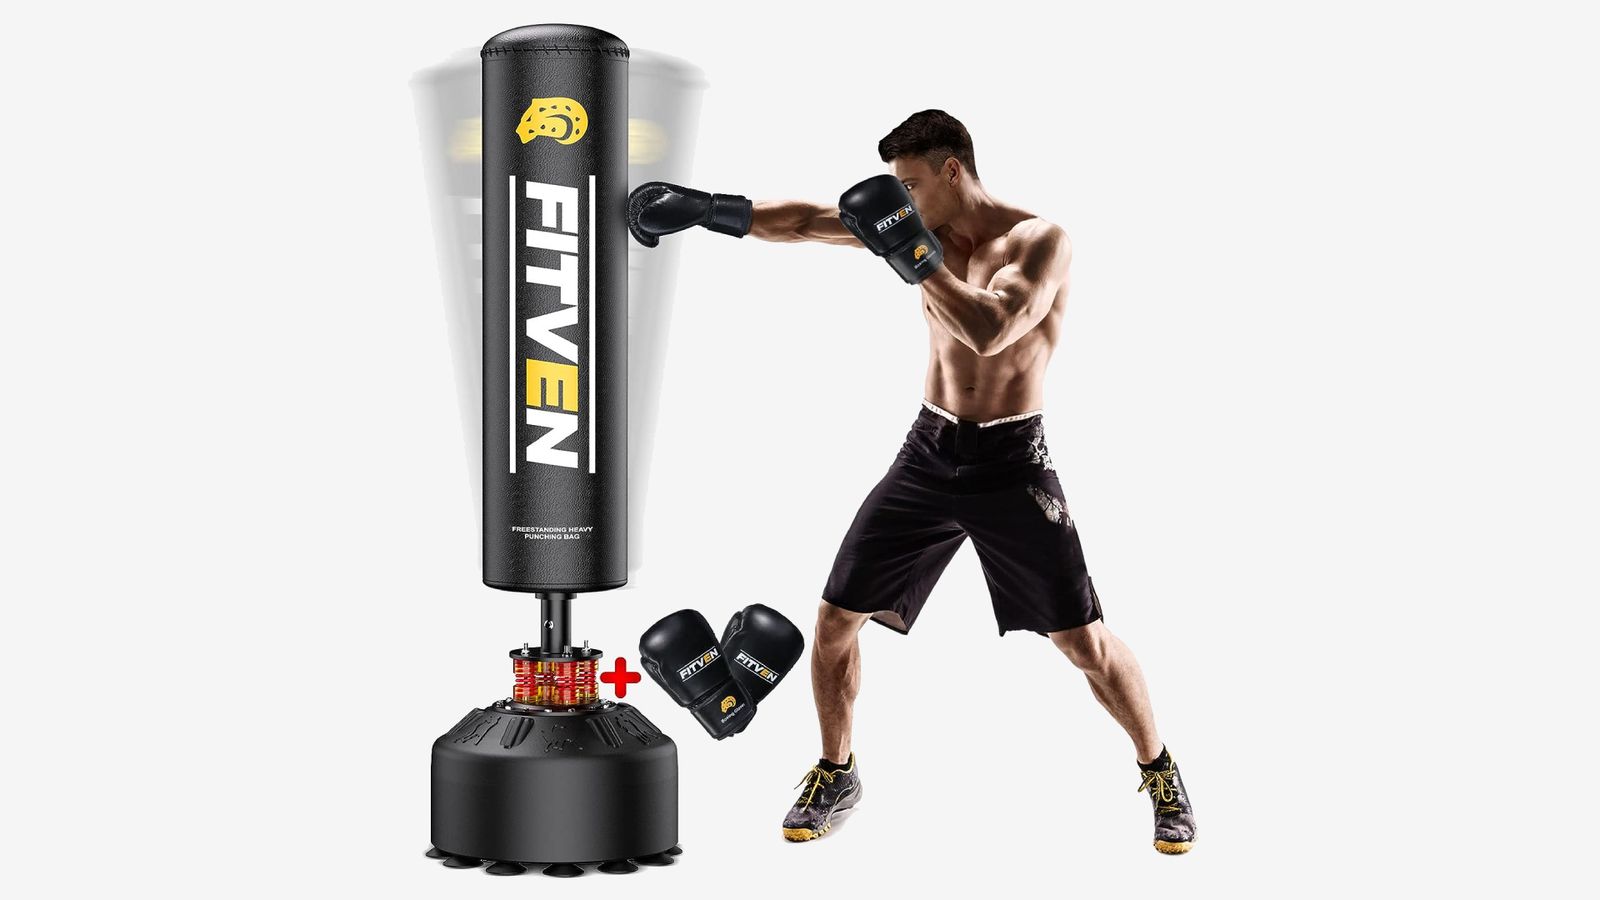 FITVEN Freestanding Punching Bag product image of someone wearing black shorts striking a black weighted heavy bag featuring white and gold branding.